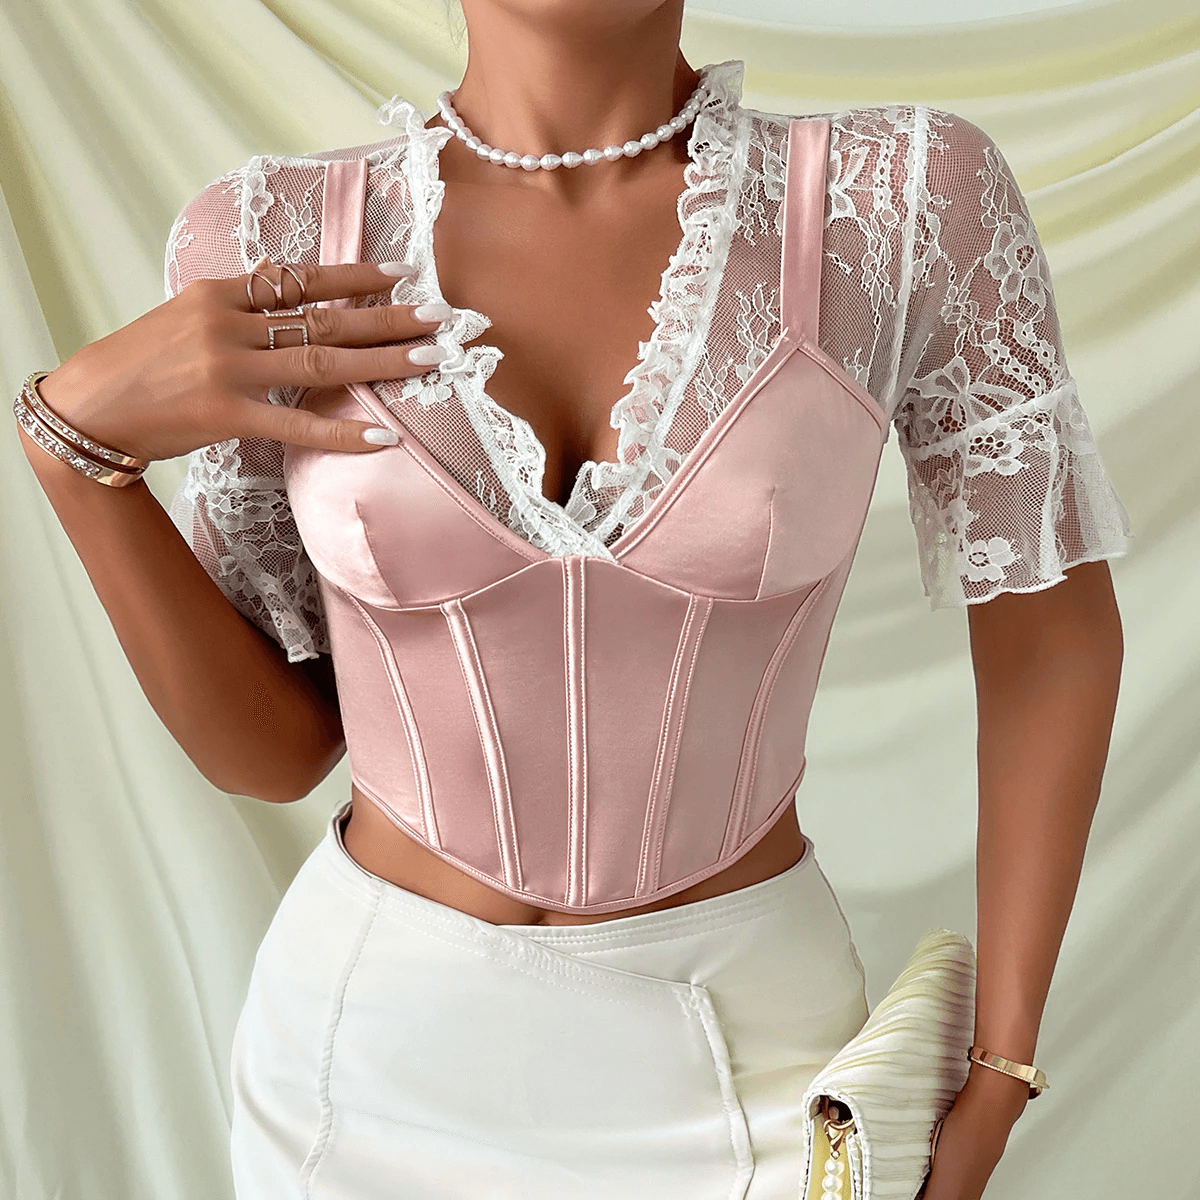 Lexie Floral Puff Sleeve Bustier Crop Top - Hot fashionista